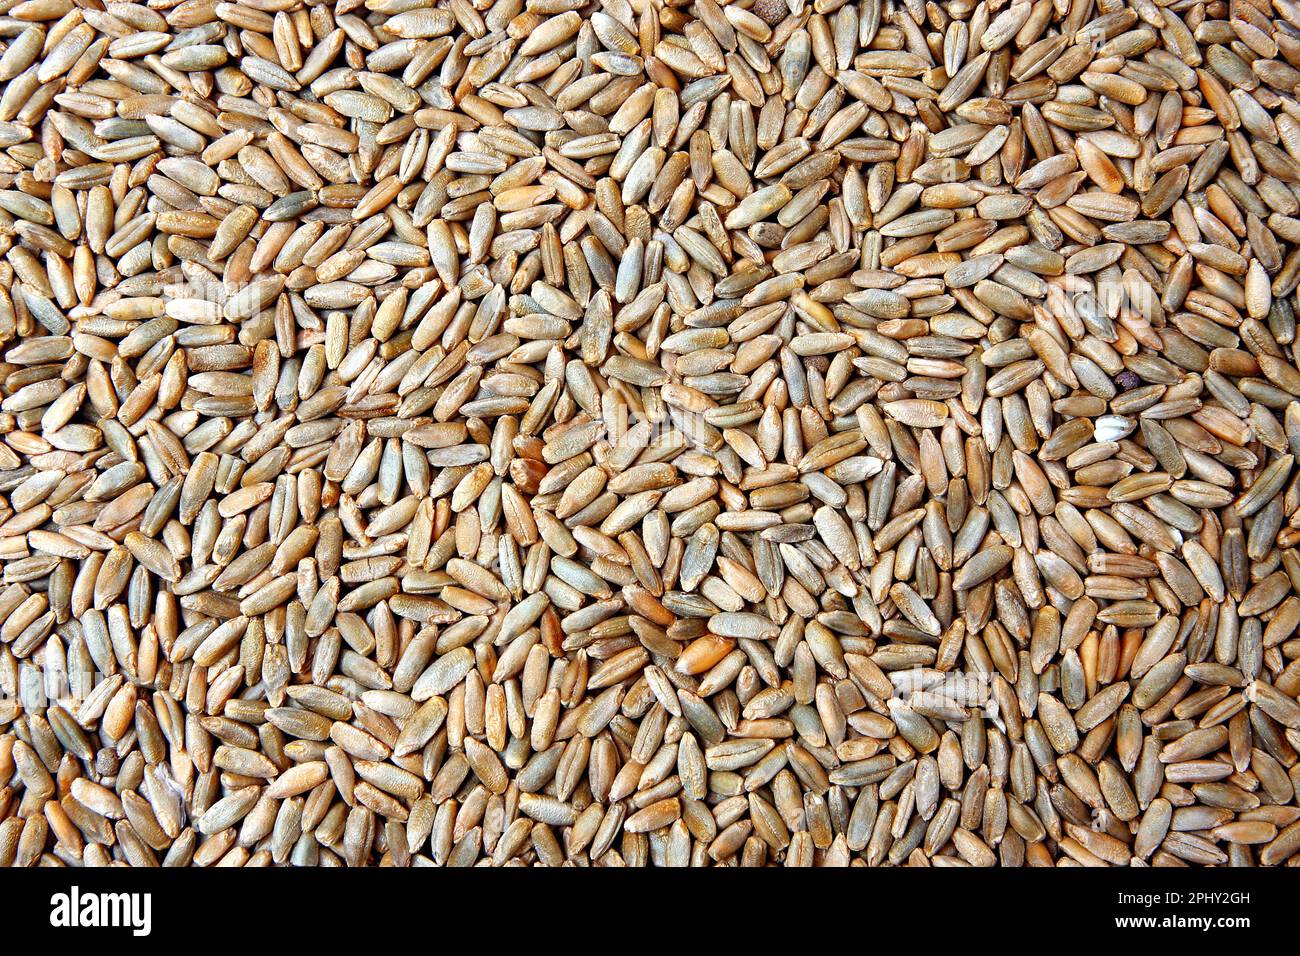 cultivated rye (Secale cereale), rye grains Stock Photo